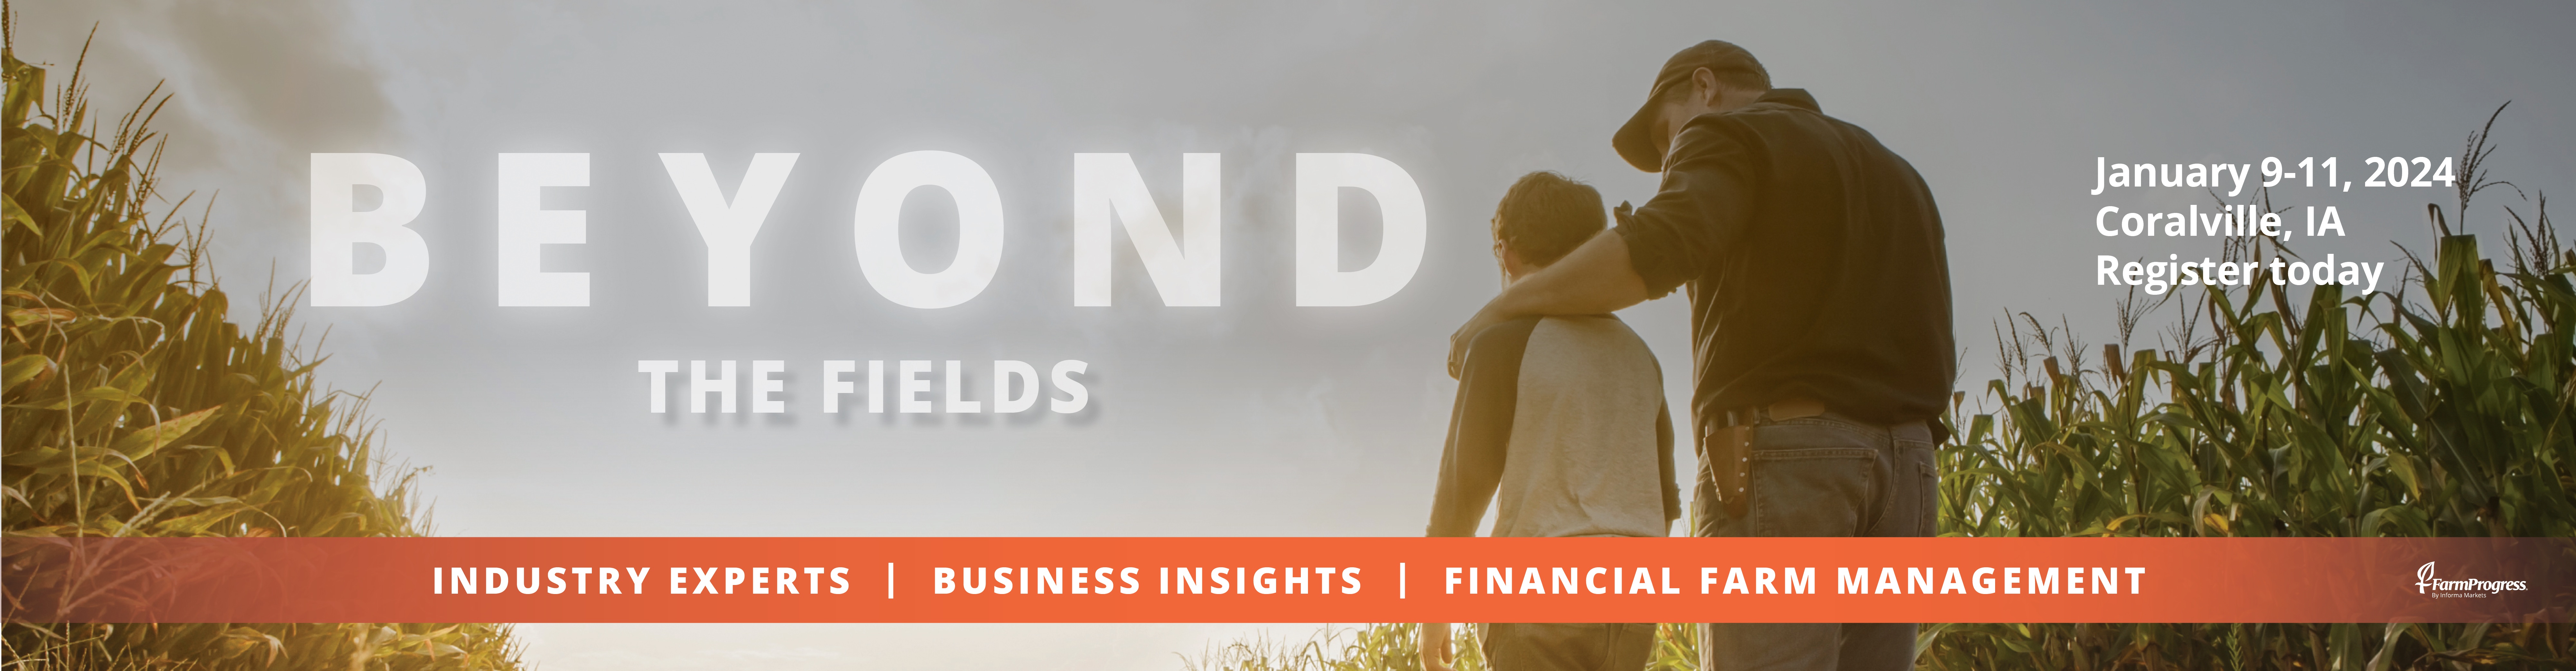 Beyond the Fields - January 9-11, 2024 Coralville, IA -- Industry Experts | Business Insights | Financial Farm Management